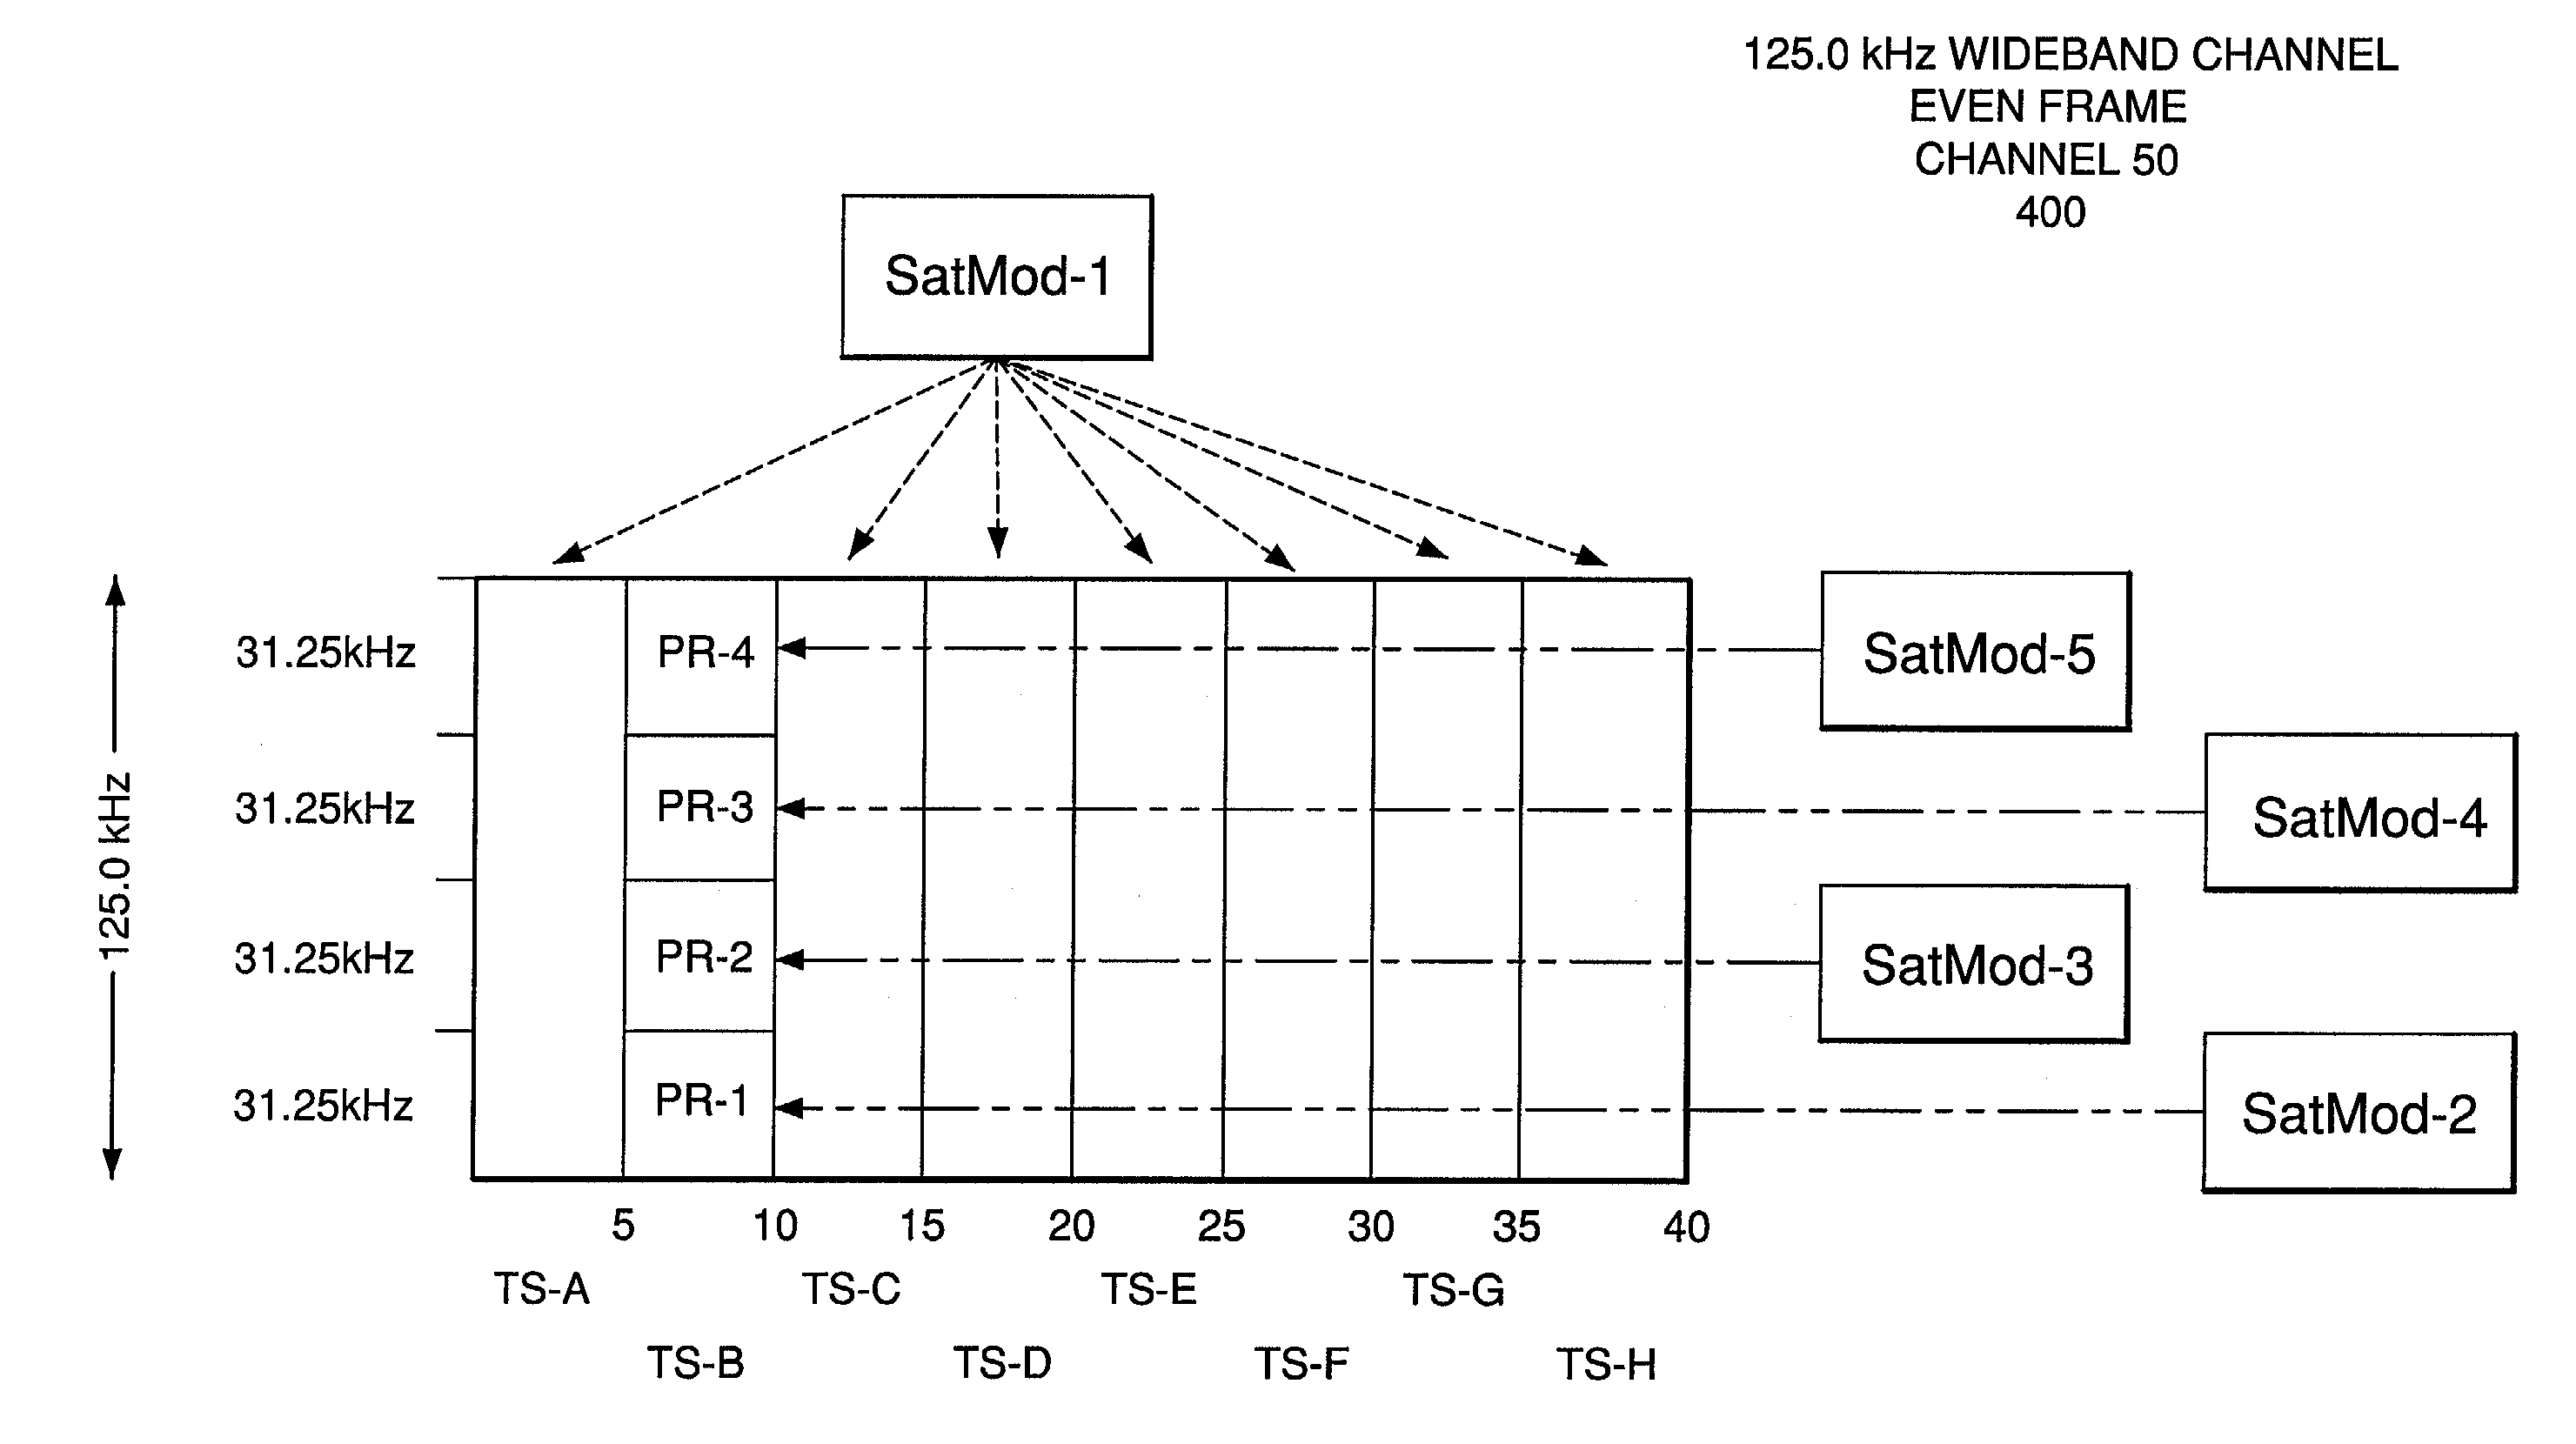 System and method for efficiently using channel unit hardware to provide multiple narrowband channels overlaid on a single wideband channel in a satellite communications network